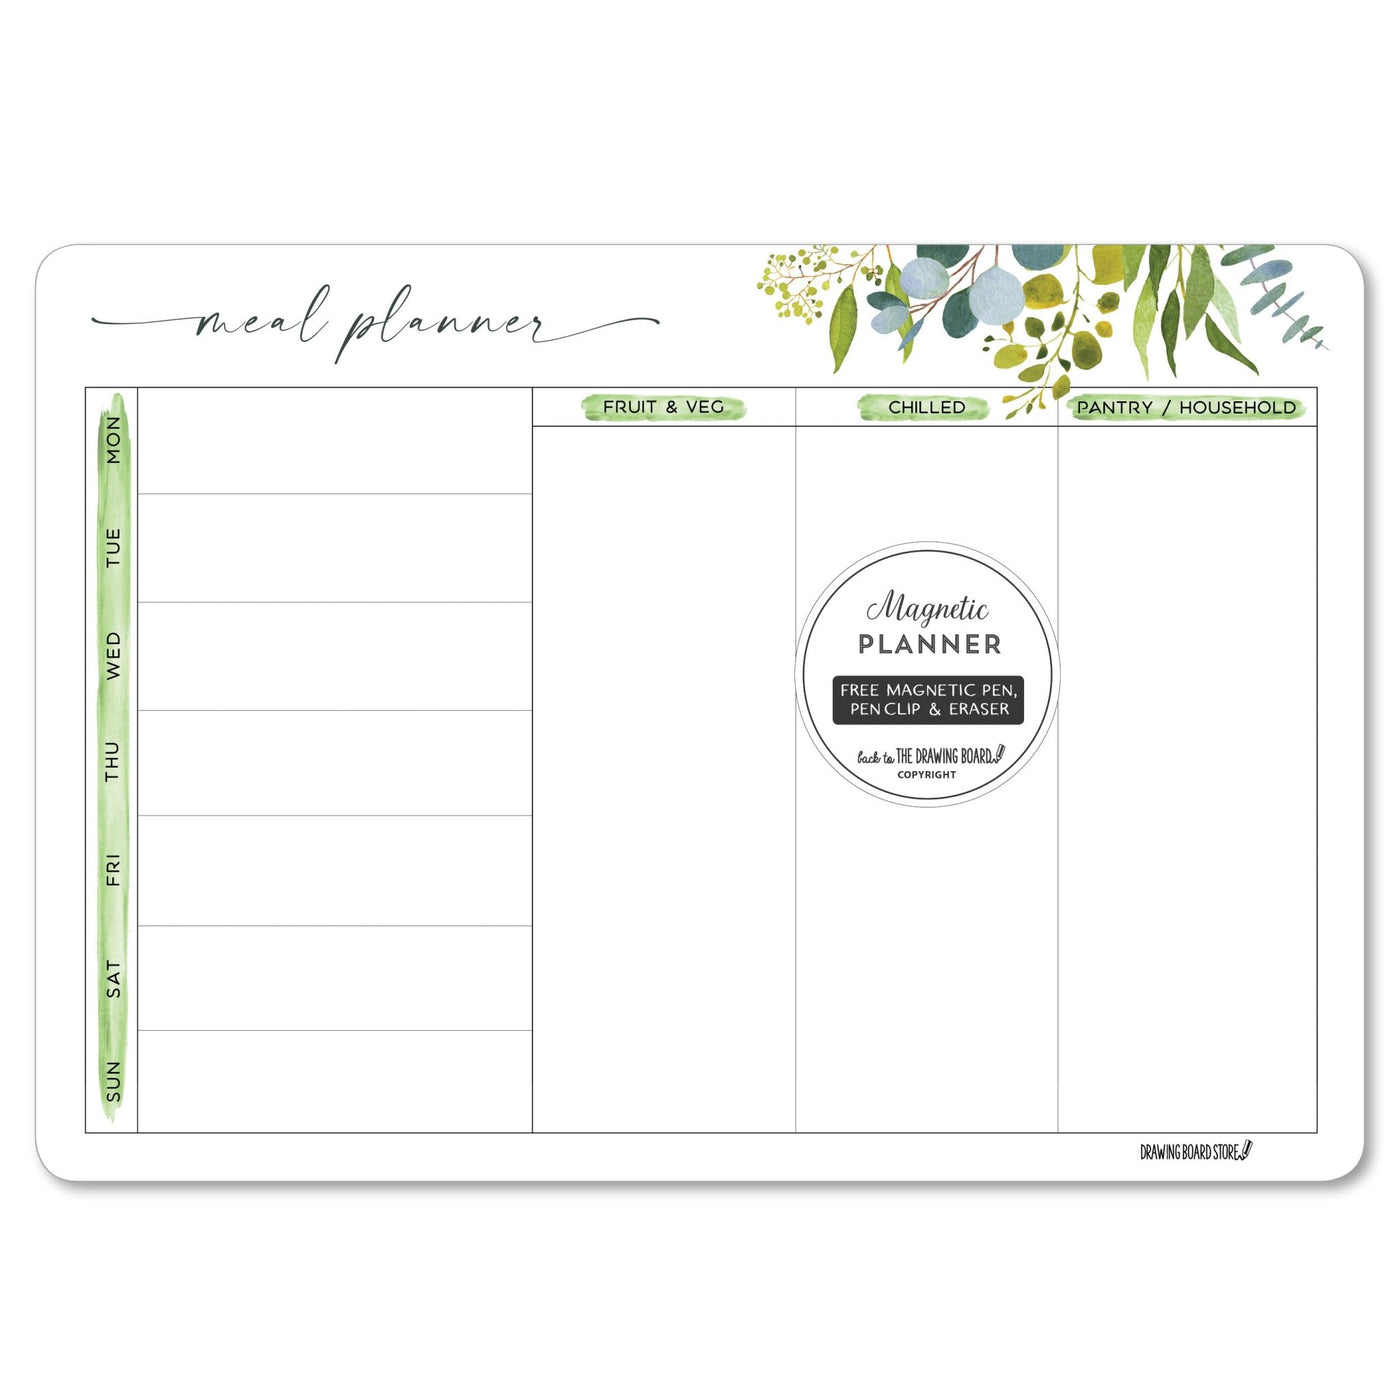 Meal Planners - Drawing Board Store